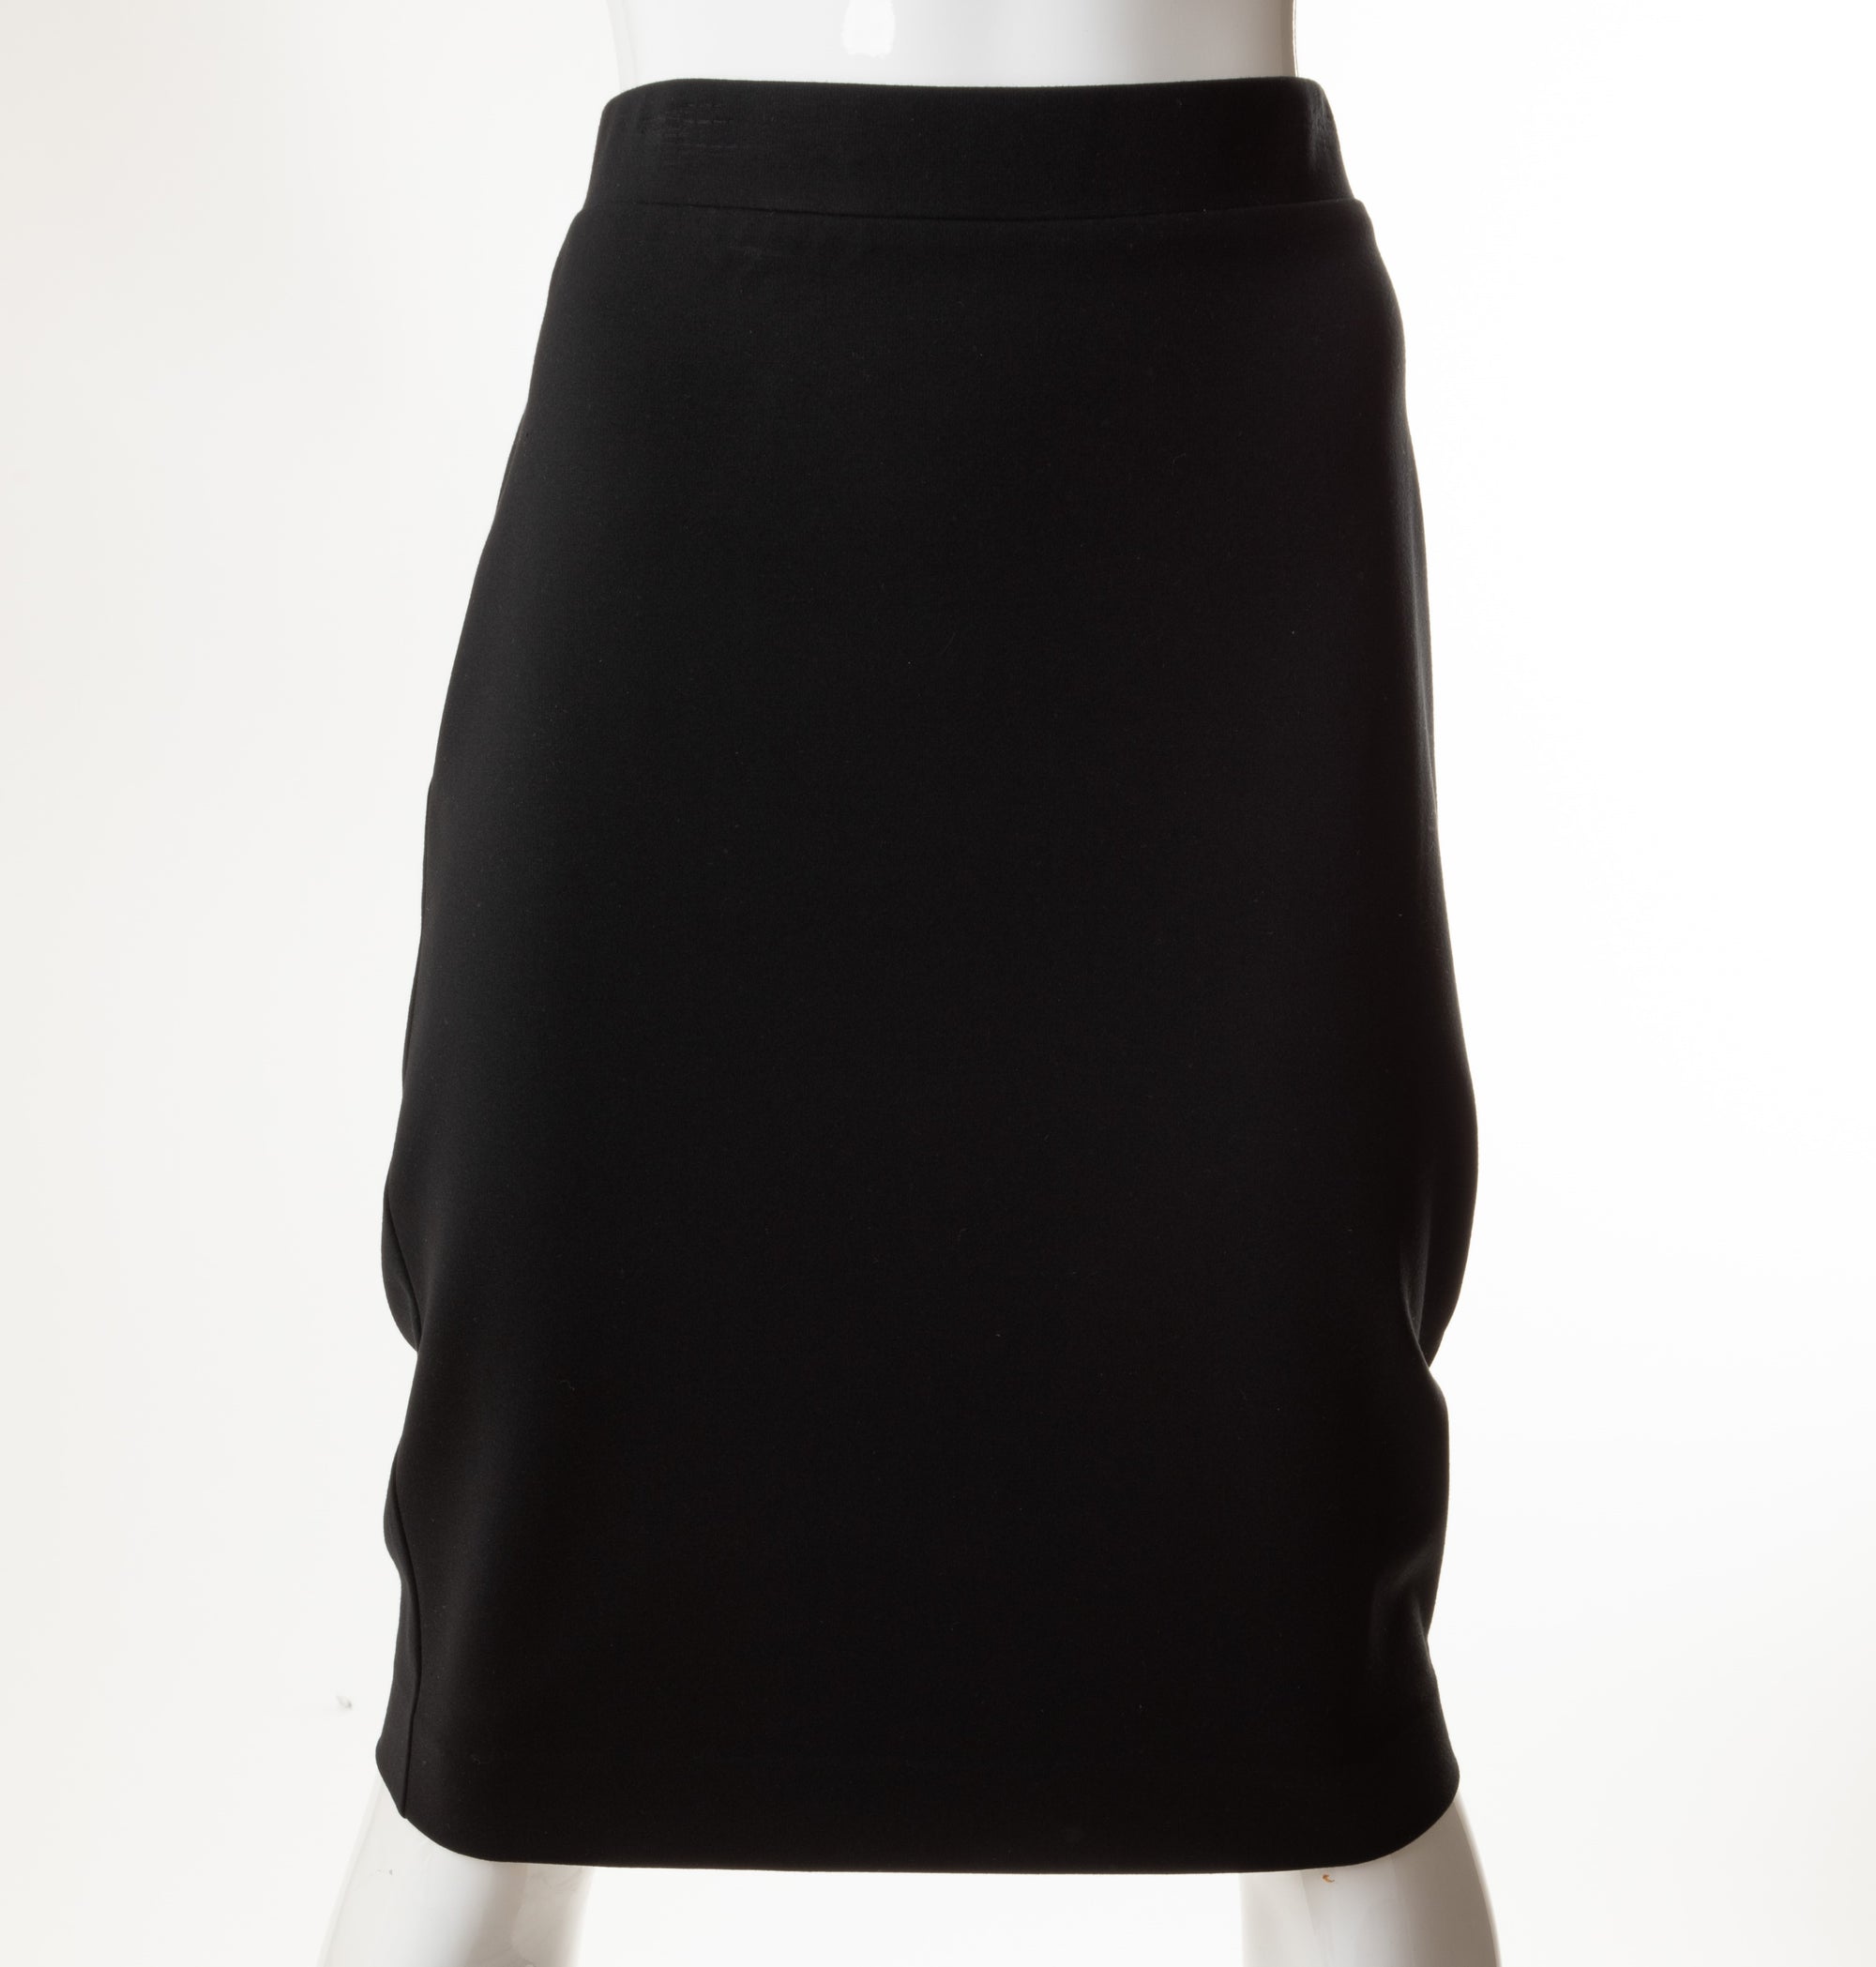 WEAR AND FLAIR PULL ON PONTE PENCIL SKIRT 27" BLACK